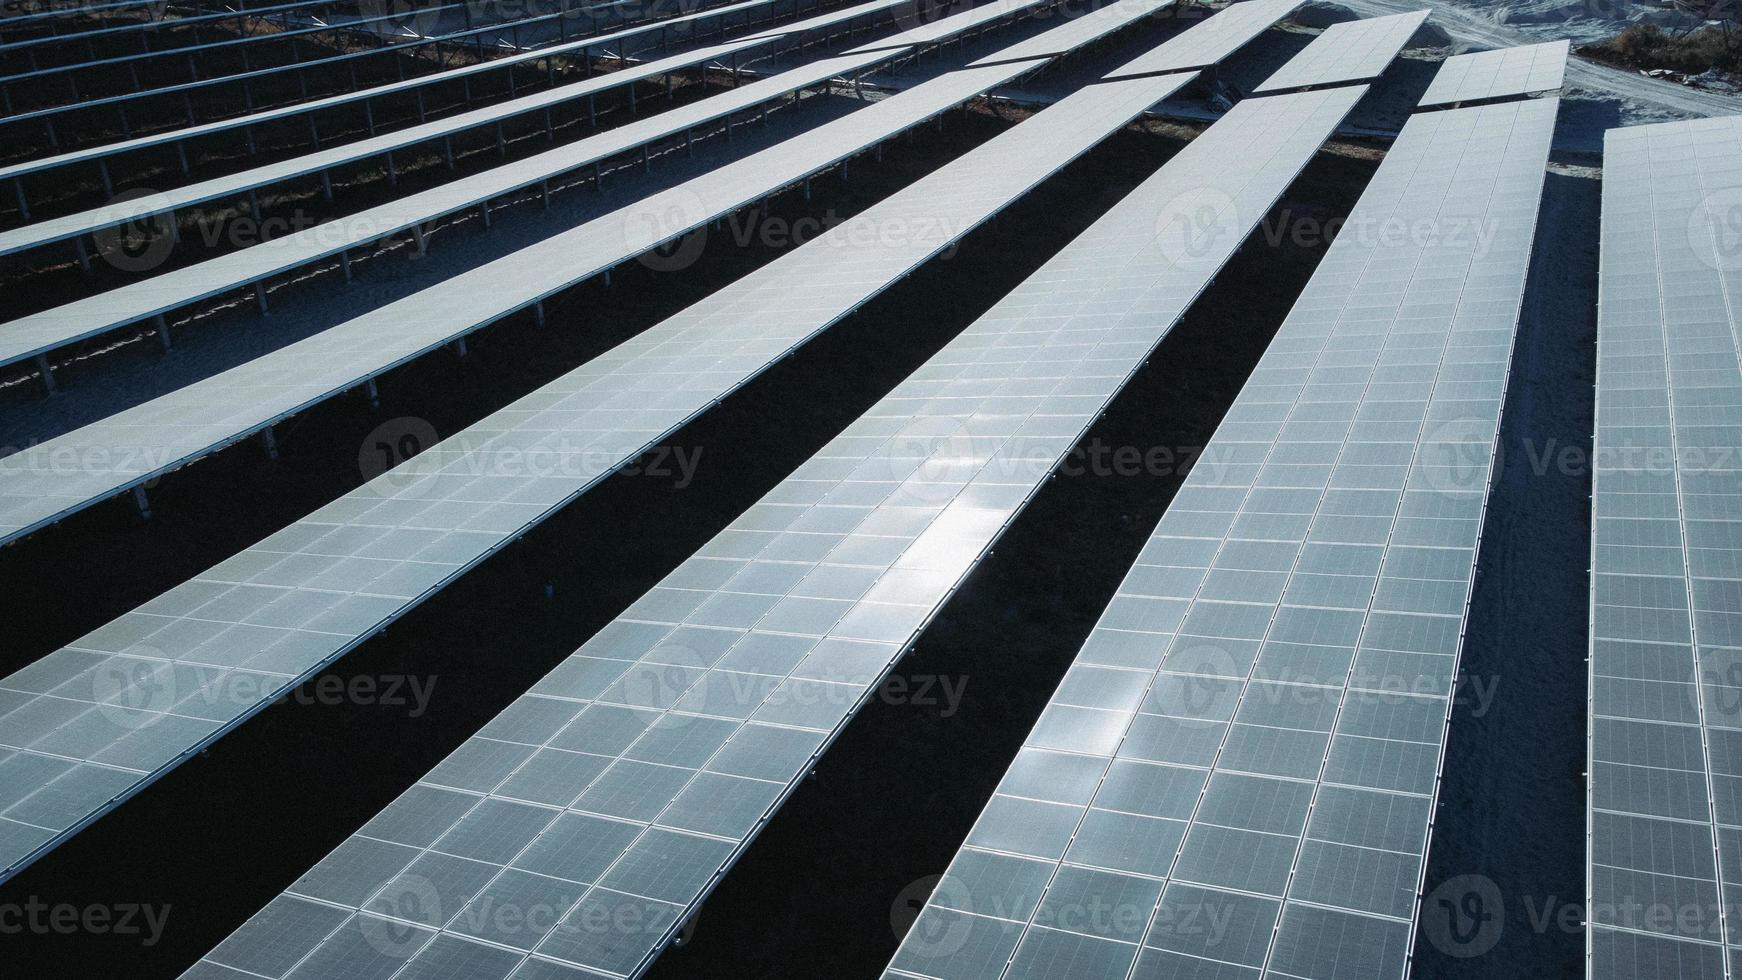 Solar Cell in the Solar Farm. Concept of sustainable of green energy by generate energy power from sunlight. photo